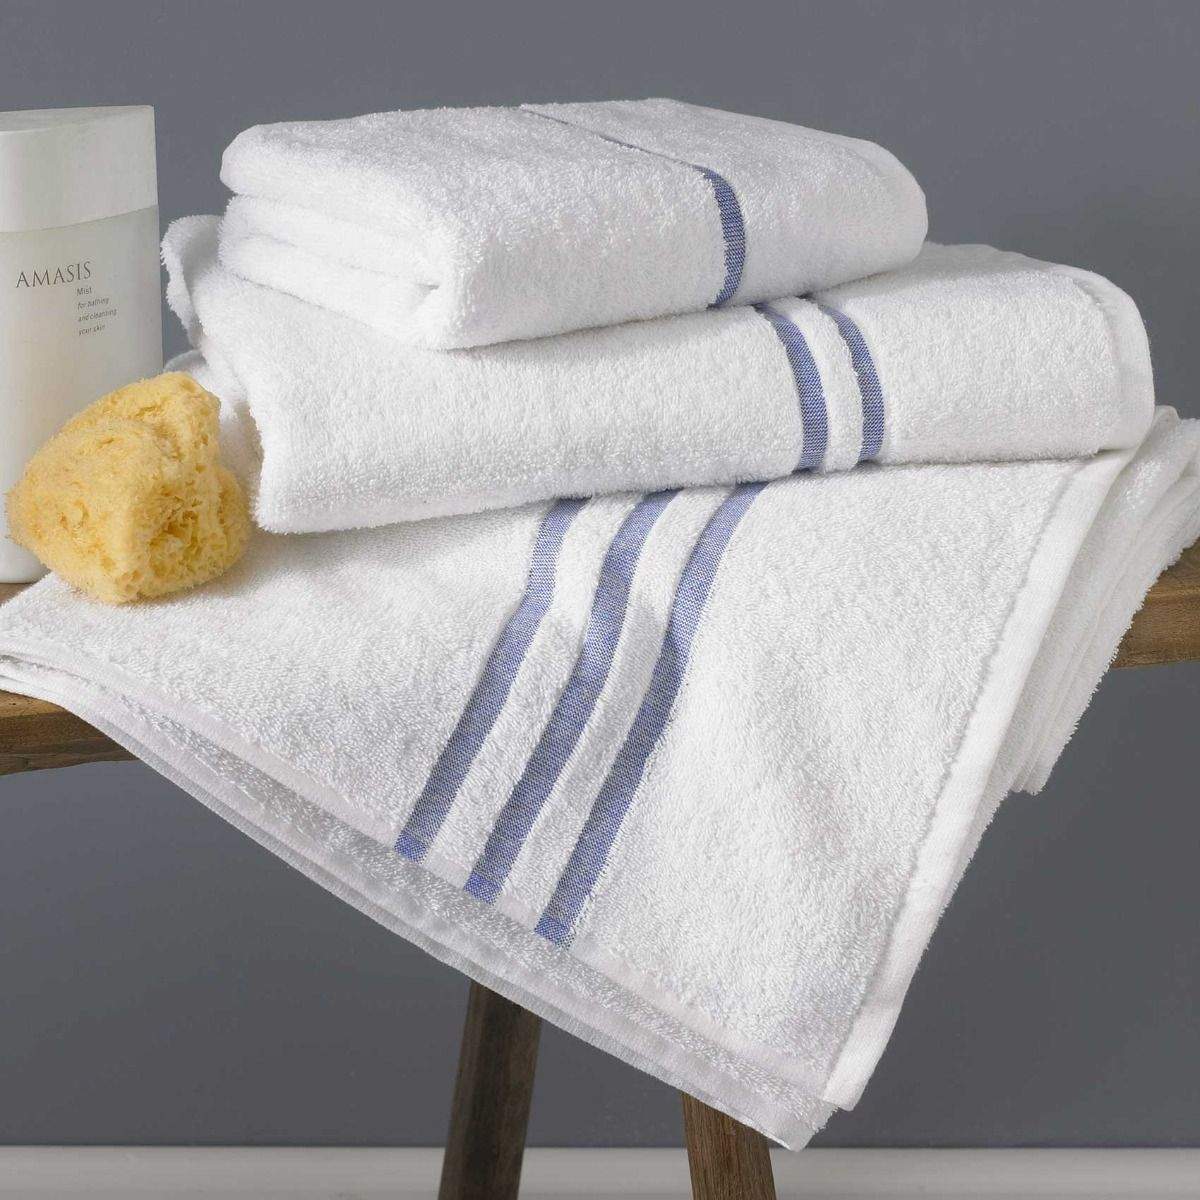 Luxury Hotel Quality 100% Combed Cotton Premium River Stripe Spa Towels Sets Bed and Bath Linen